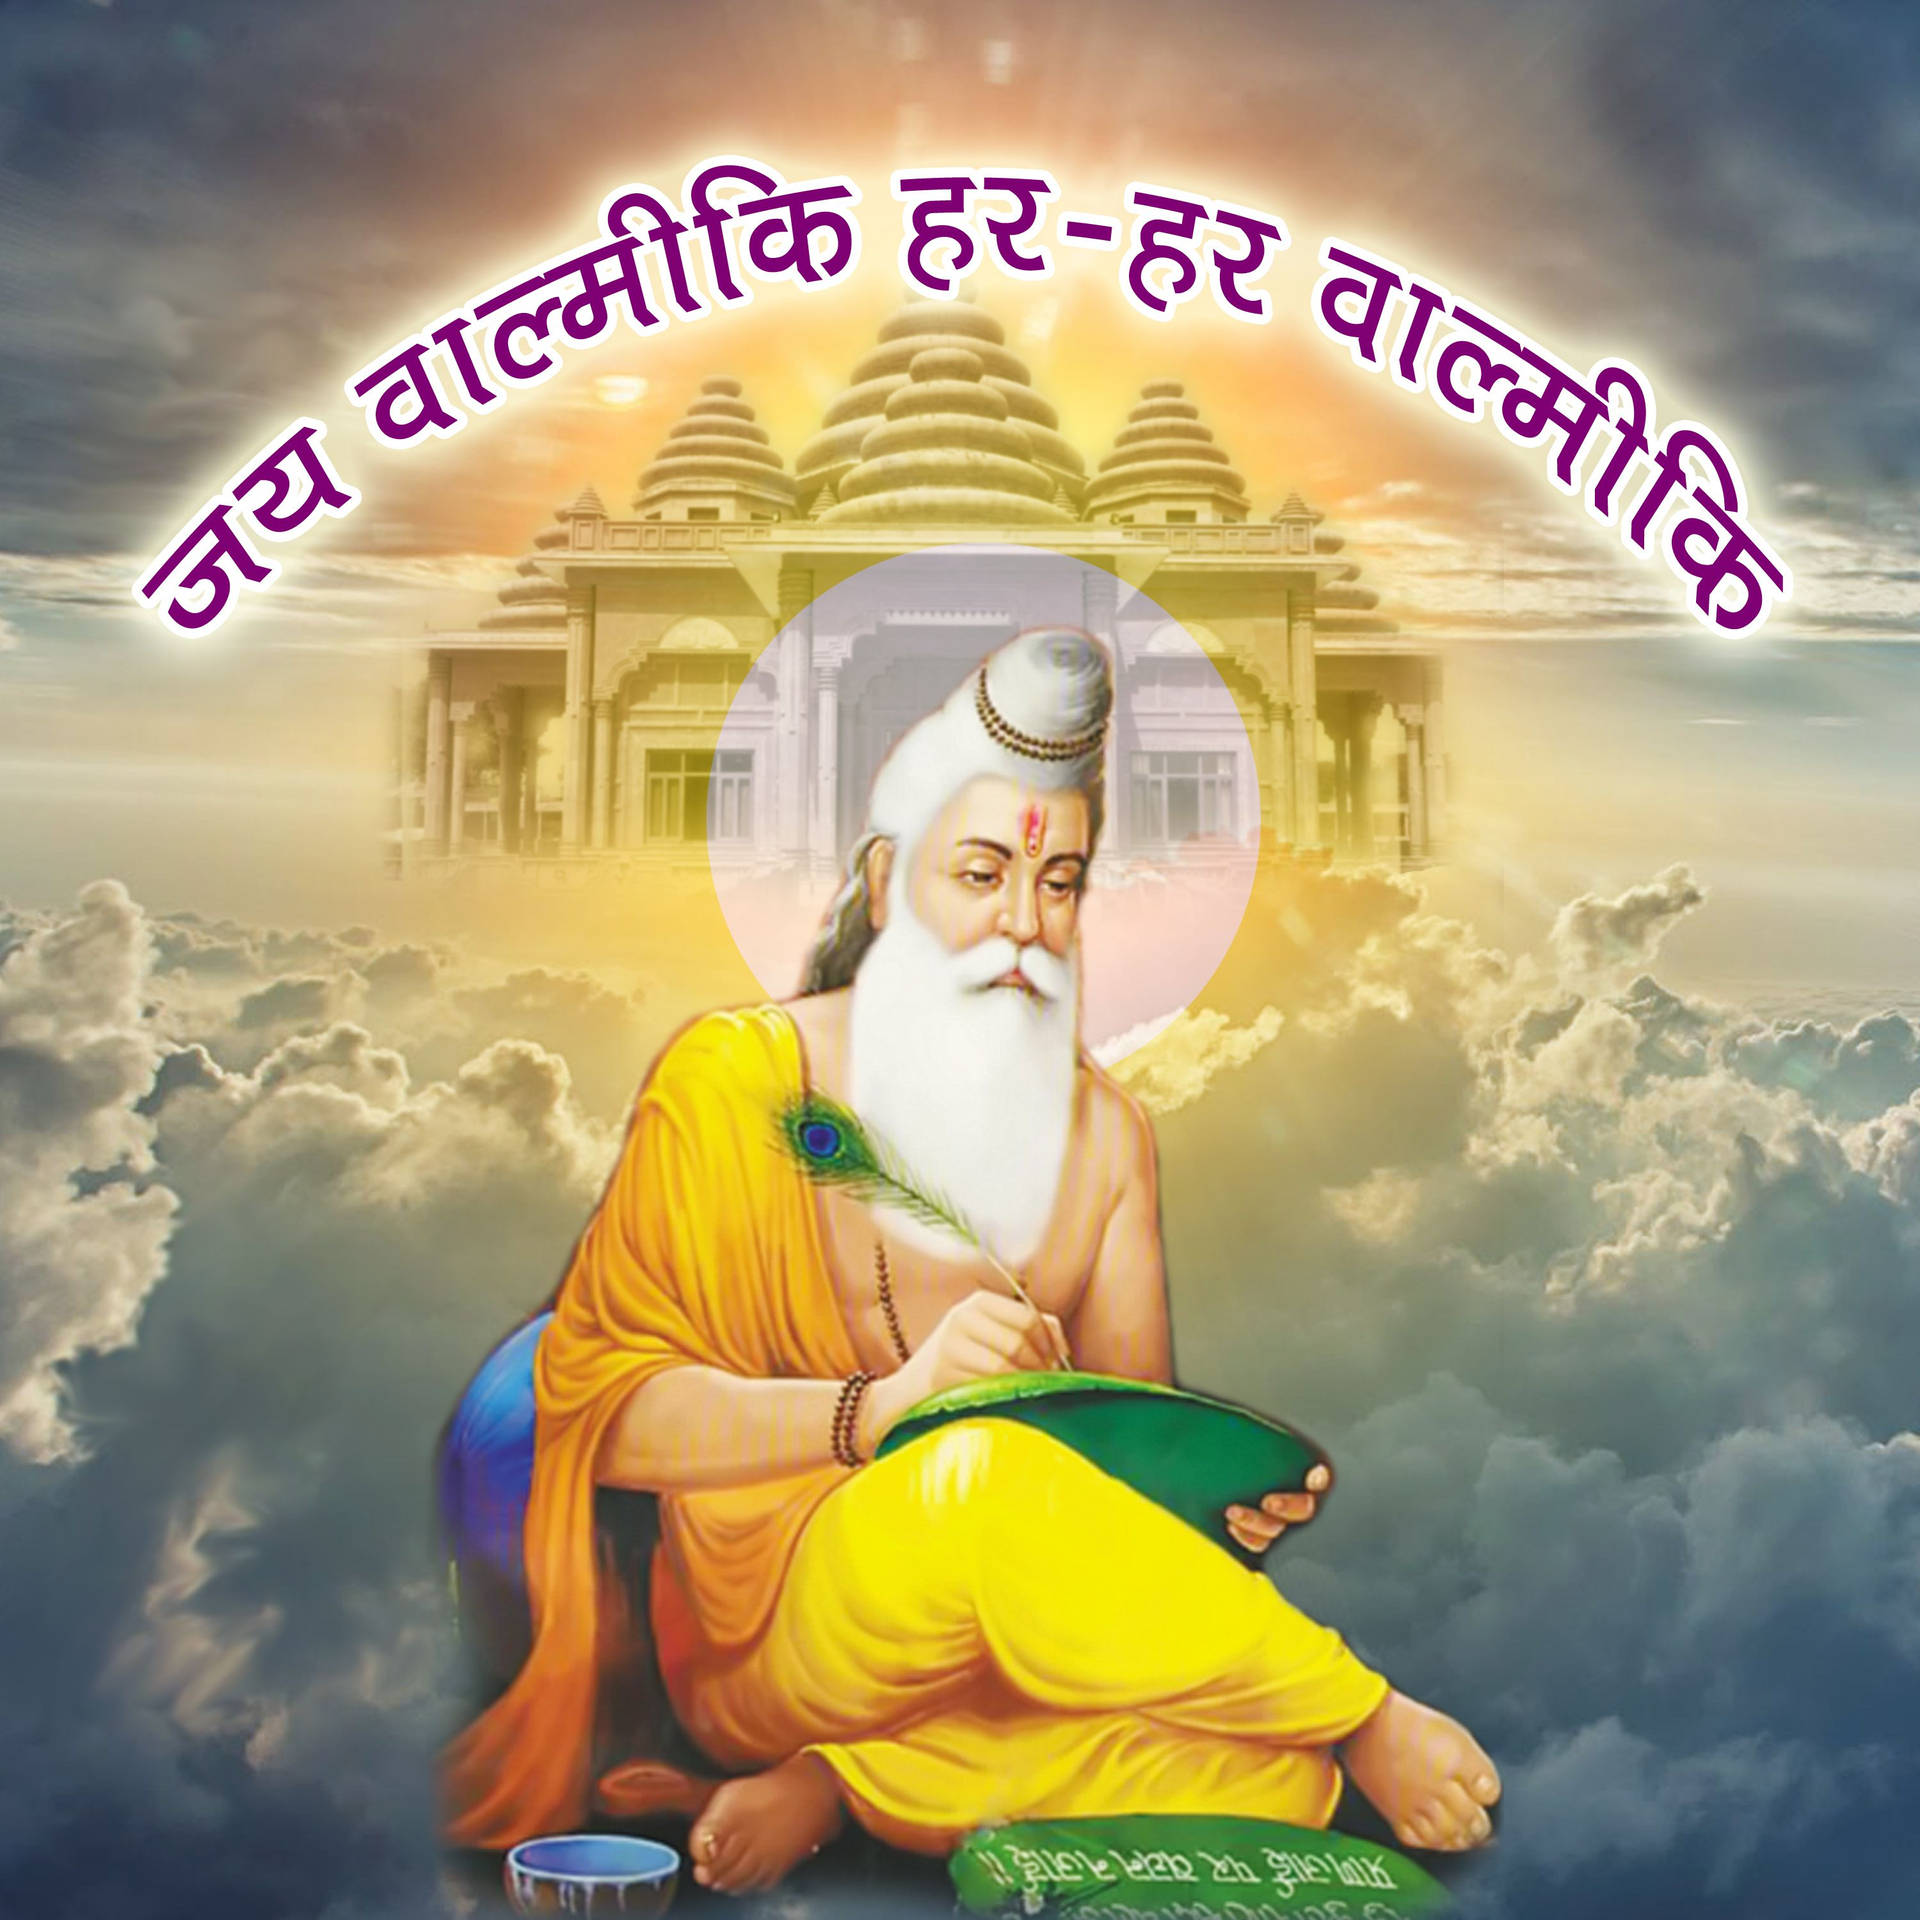 Valmiki With Museum In Clouds Wallpaper